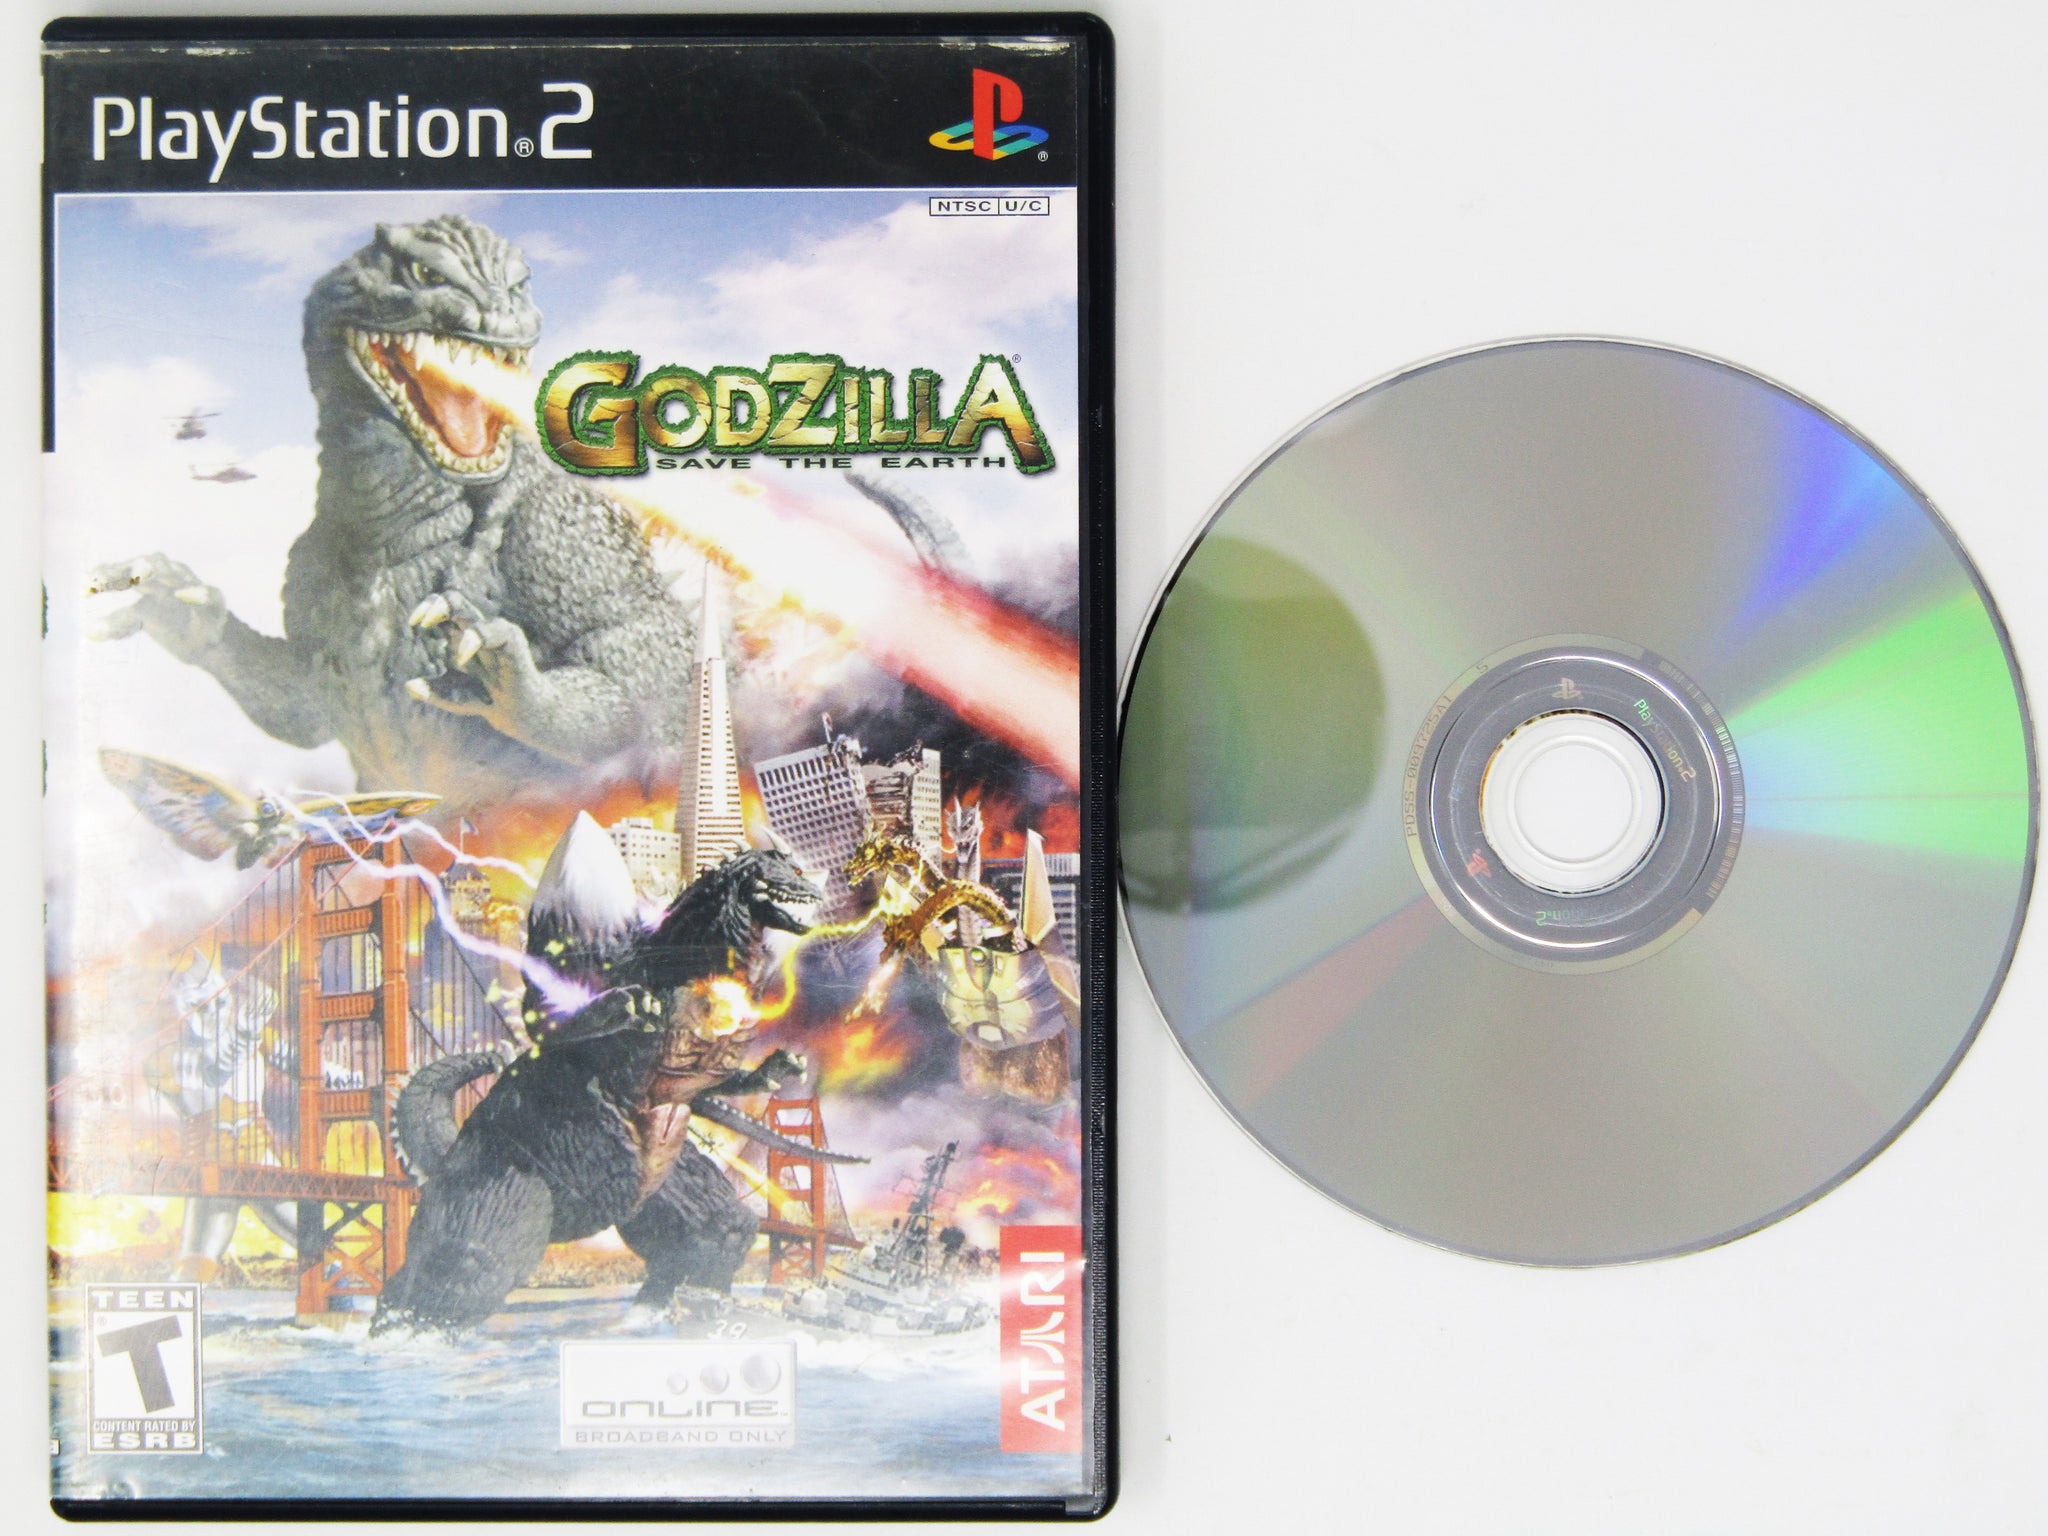 godzilla save the earth ps2 multiplayer